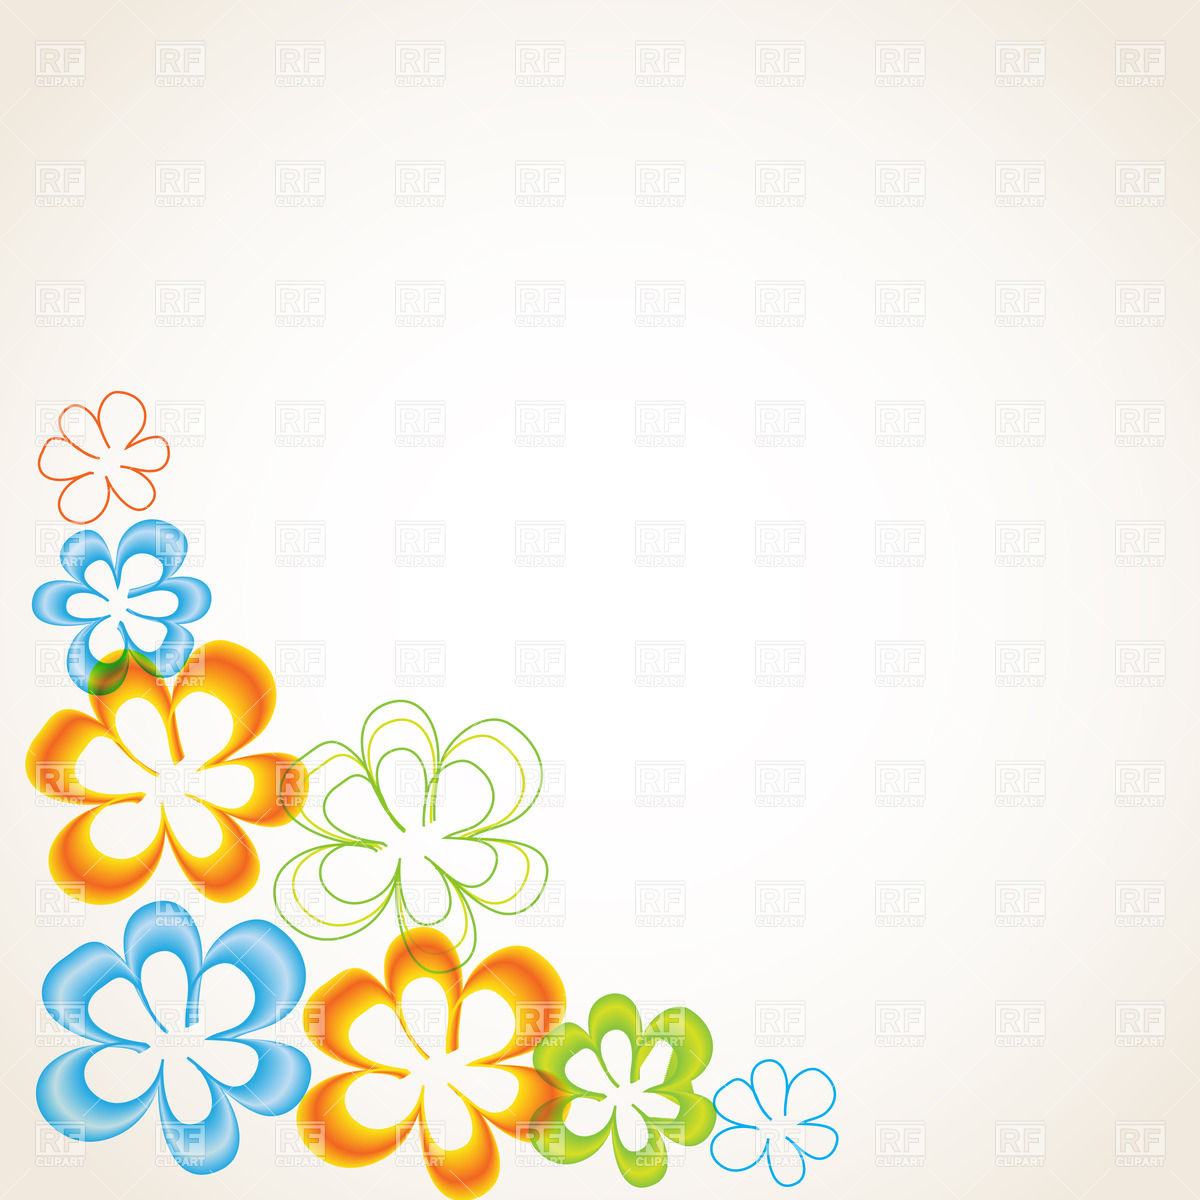 Stylized Floral Corner Download Royalty Free Vector Clipart  Eps